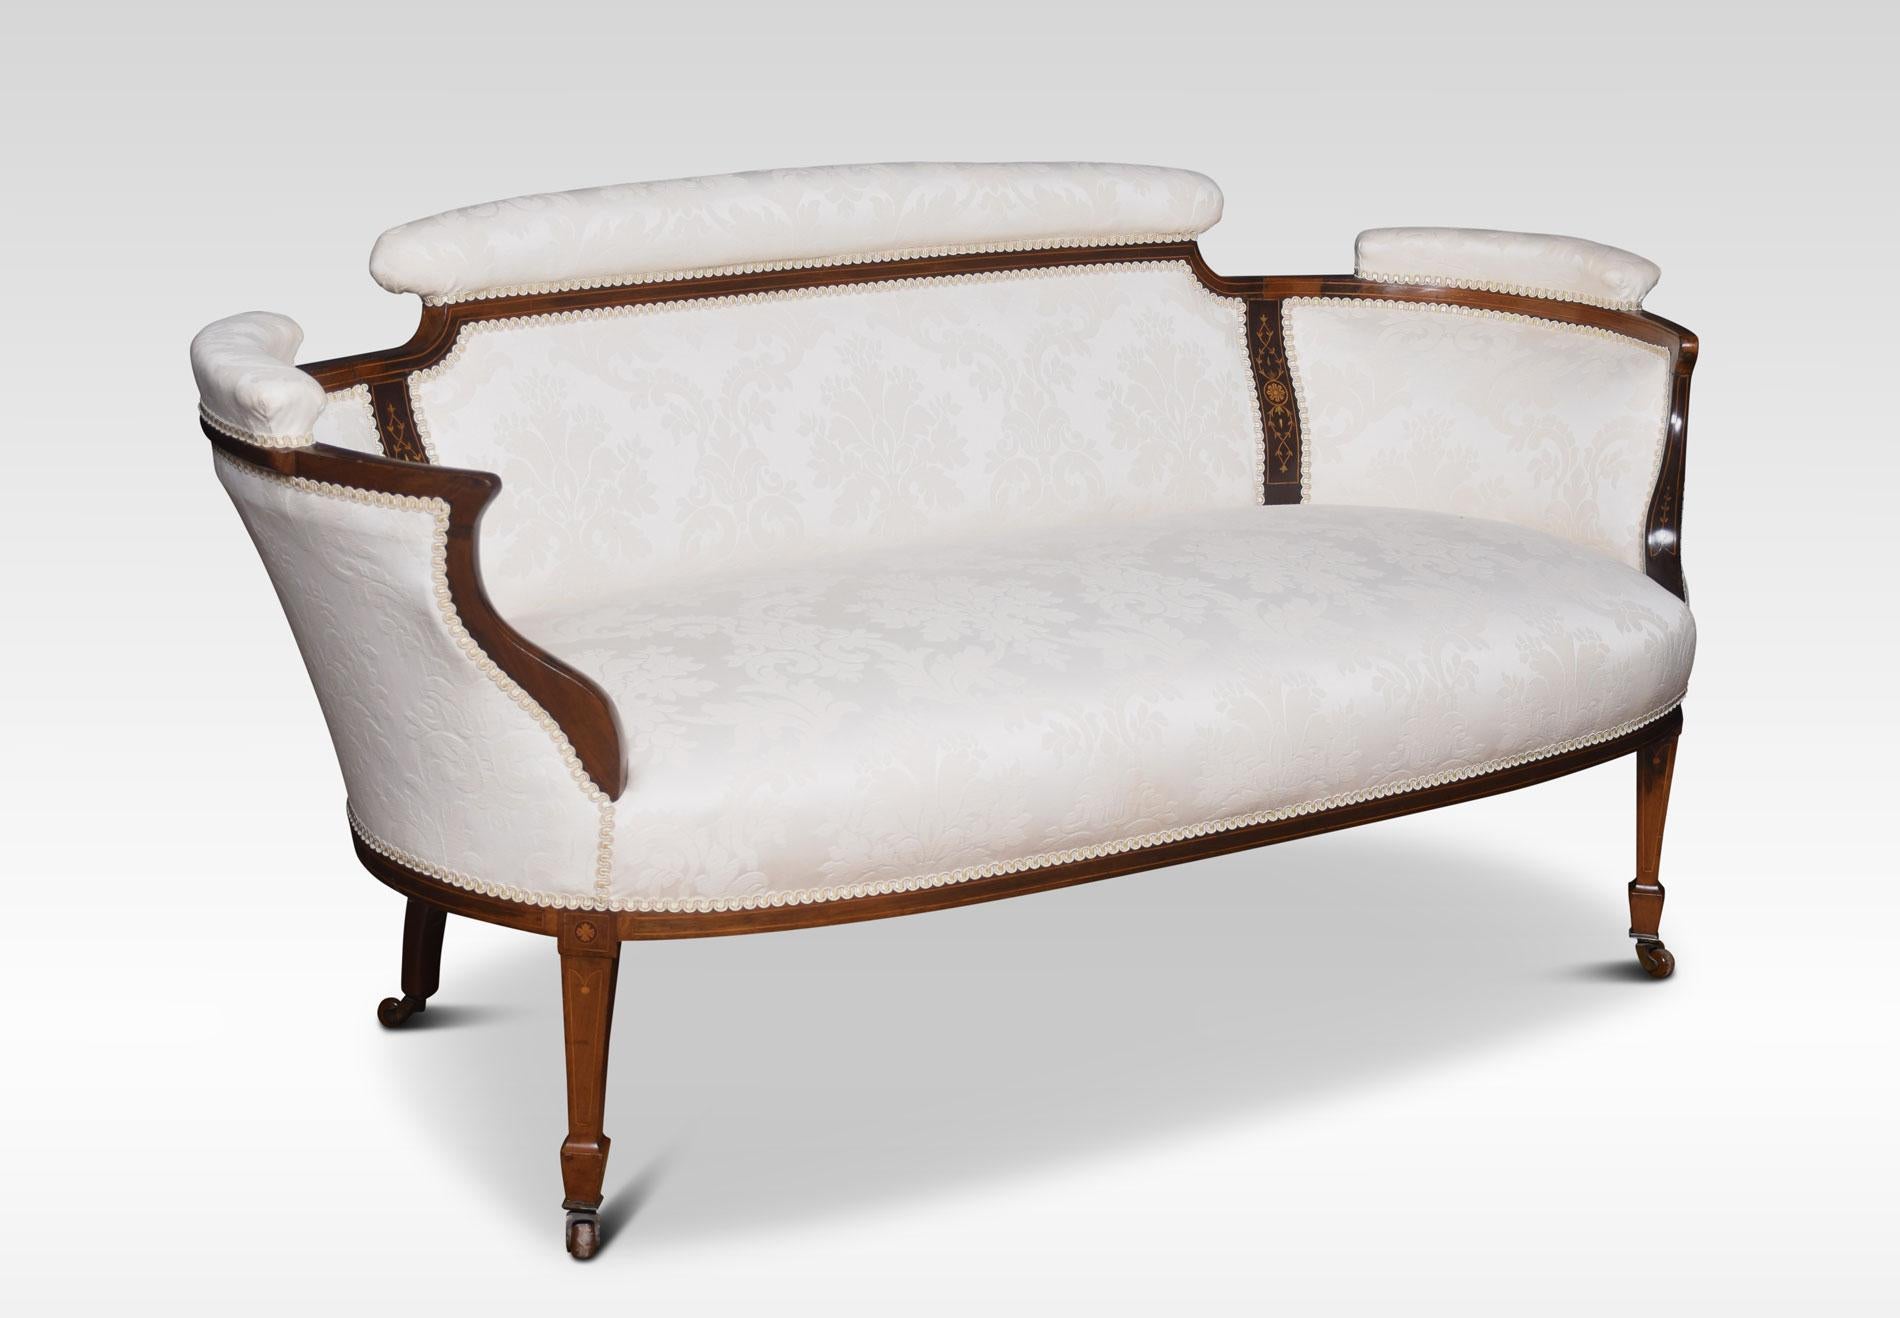 Mahogany inlaid settee the shaped back with inset inlaid panels. Enclosed by out swept arms. To the overstuffed damask upholstered seat, all raised up on square tapering legs and spade feet terminating in ceramic casters.
Dimensions:
Height 28.5